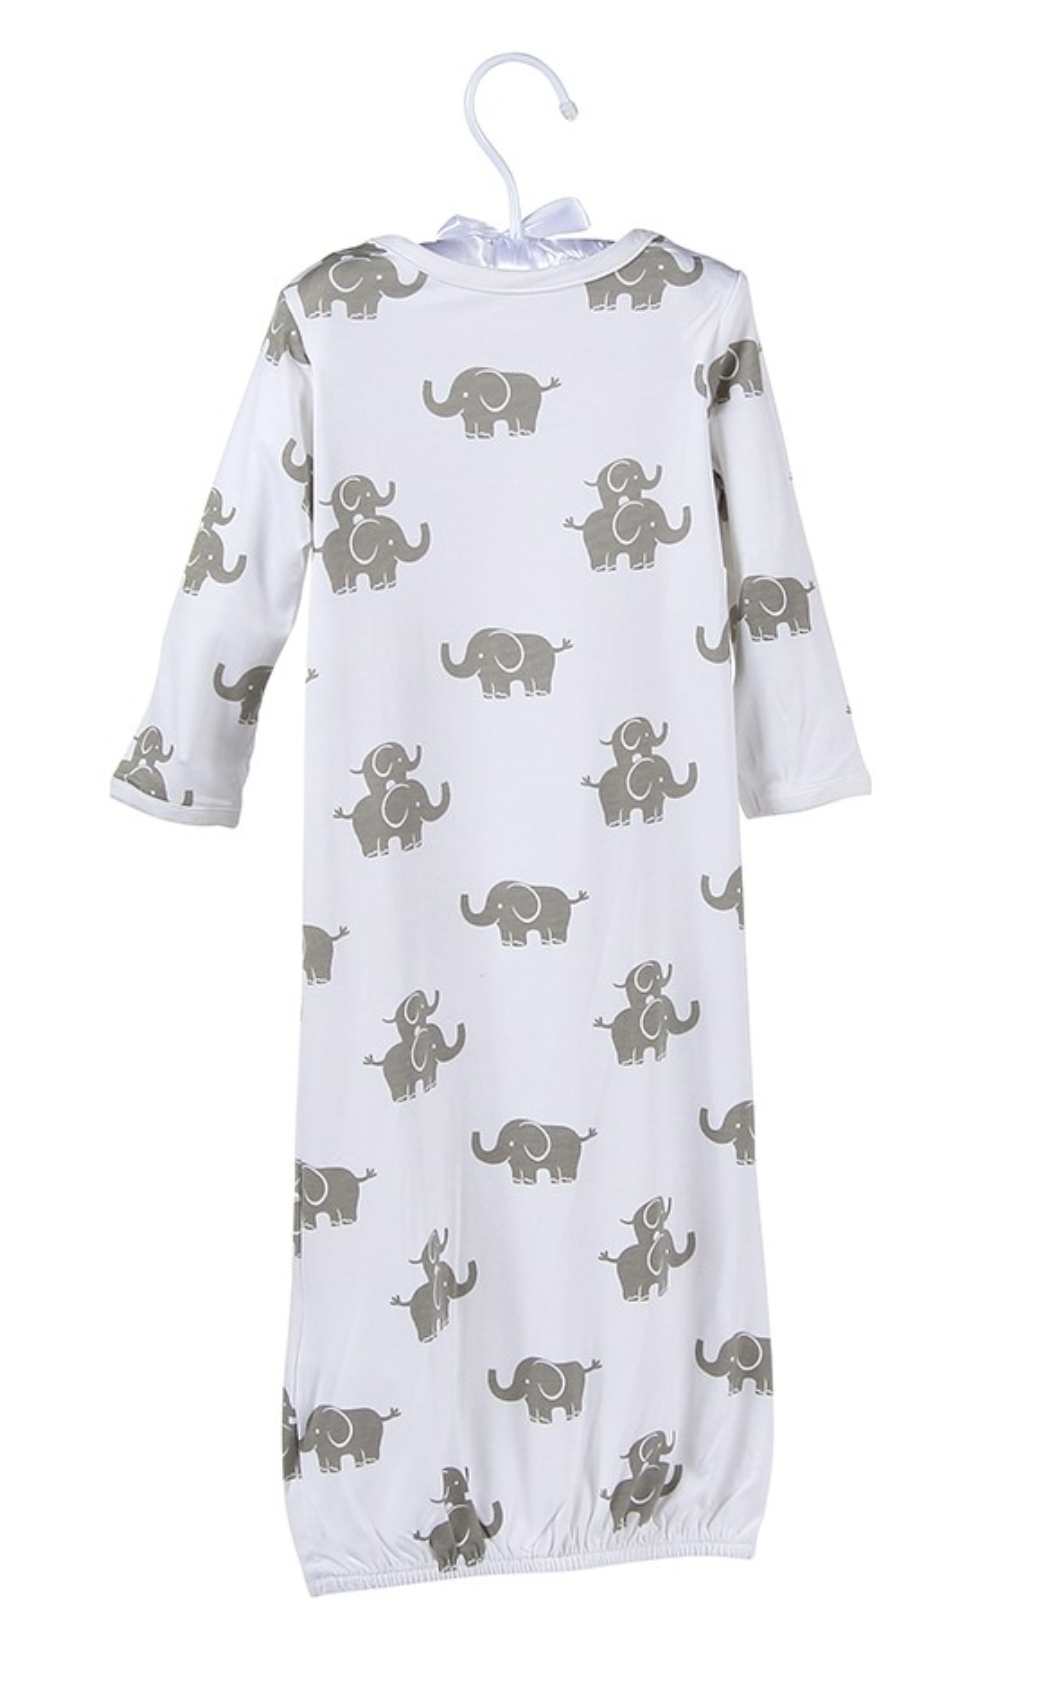 MAISON CHIC EMERSON THE ELEPHANT BAMBOO NEWBORN SACK GOWN